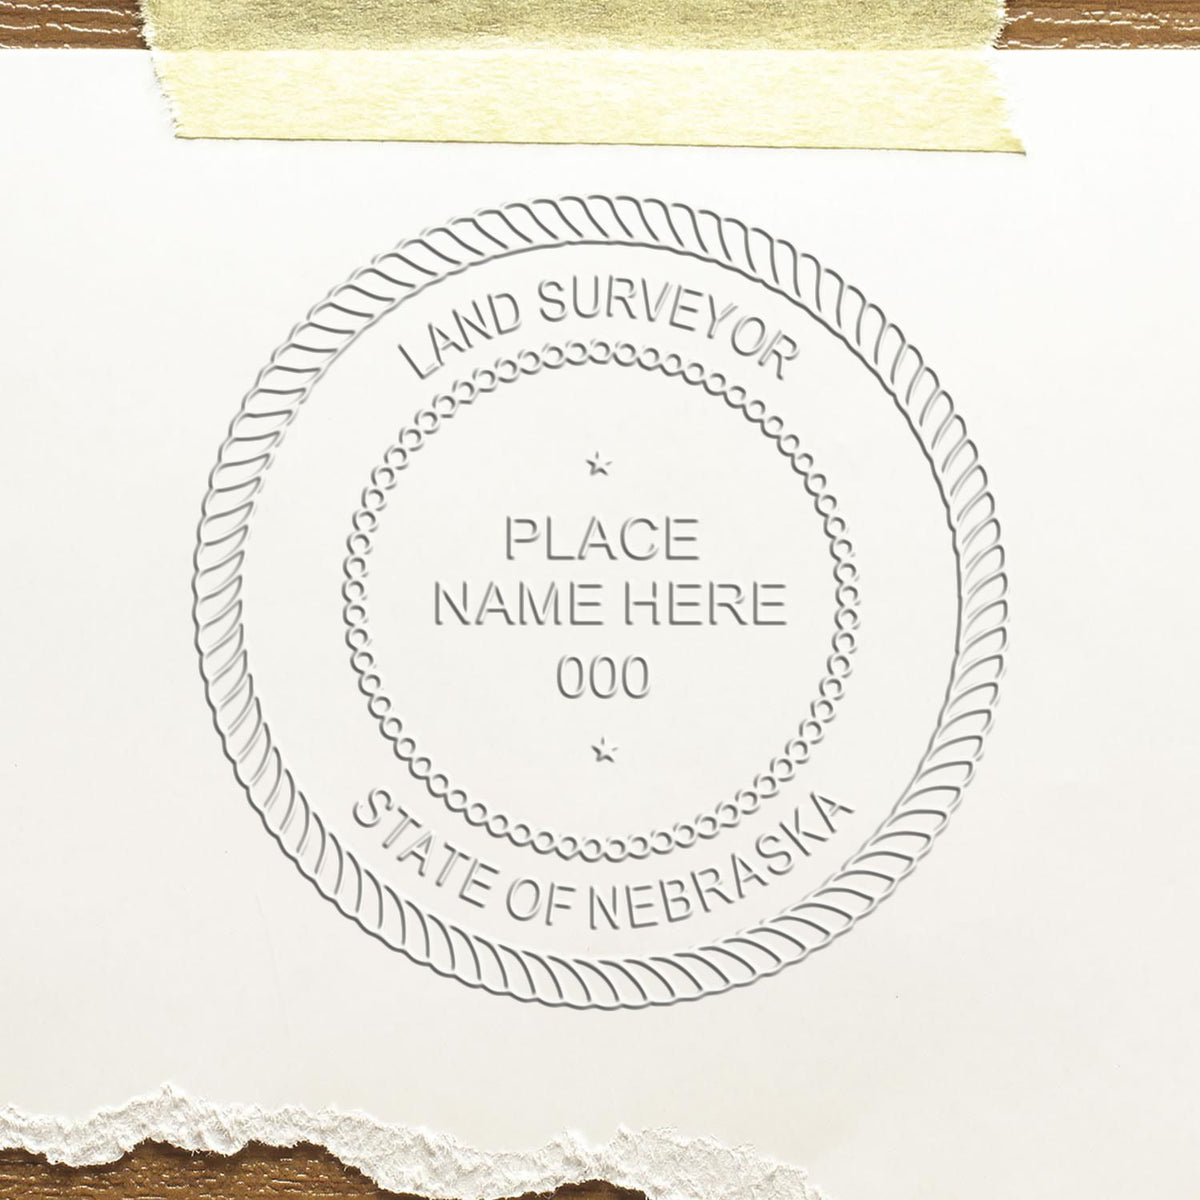 The Gift Nebraska Land Surveyor Seal stamp impression comes to life with a crisp, detailed image stamped on paper - showcasing true professional quality.